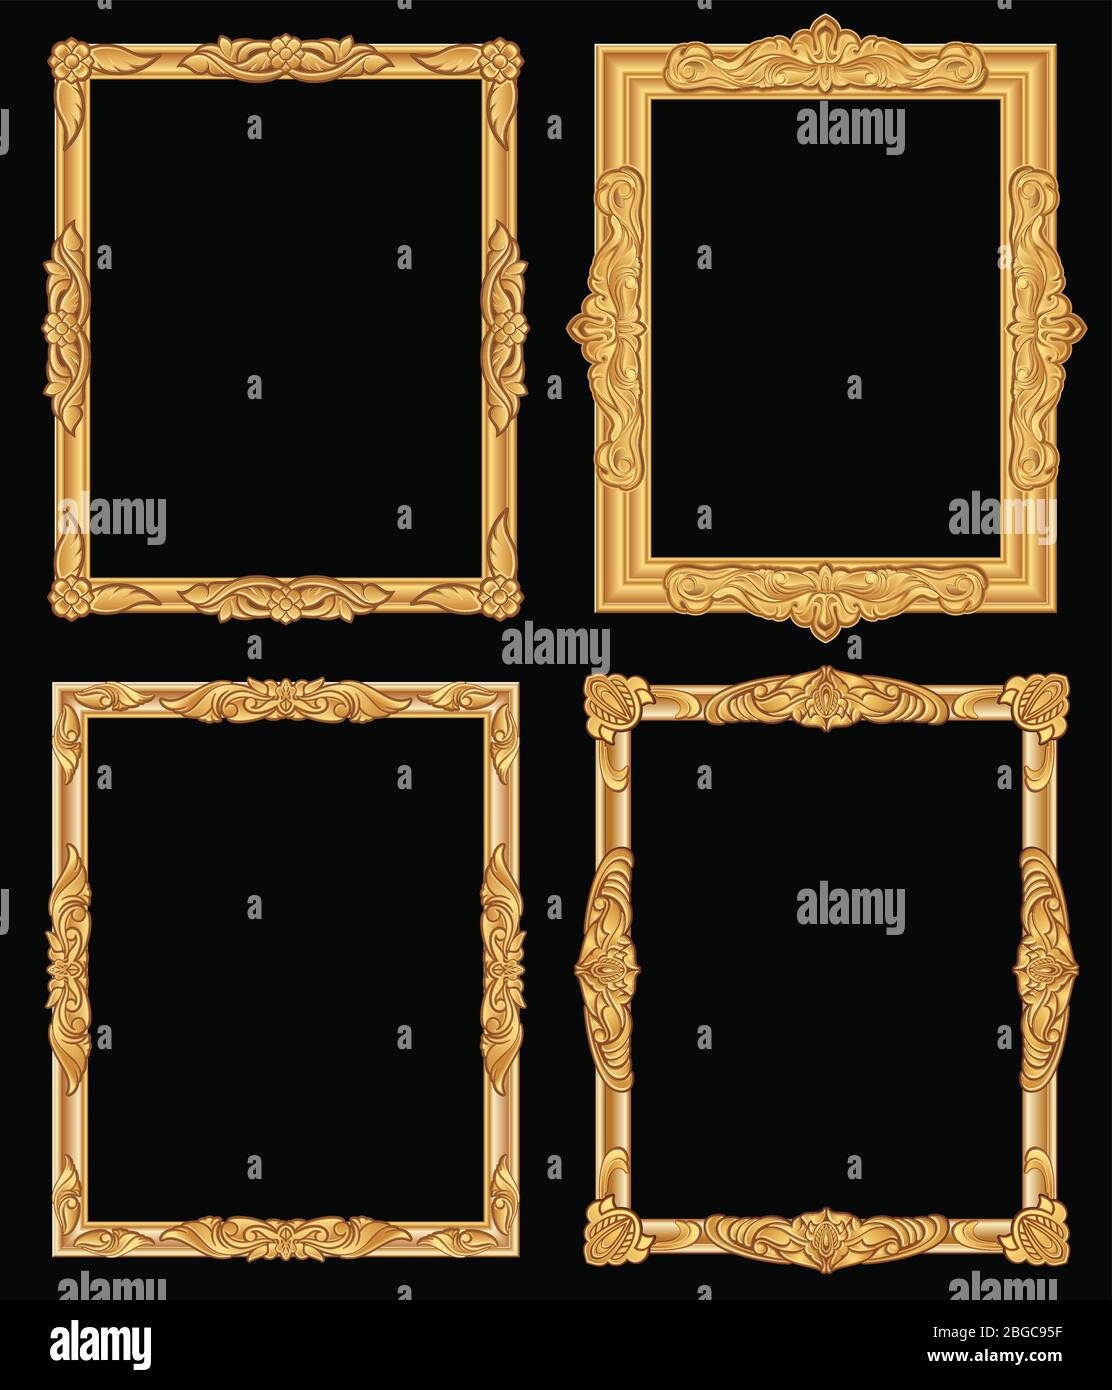 Vintage gold ornate square frames isolated. Retro shiny luxury golden vector borders. Luxury frame carving photo and picture illustration Stock Vector